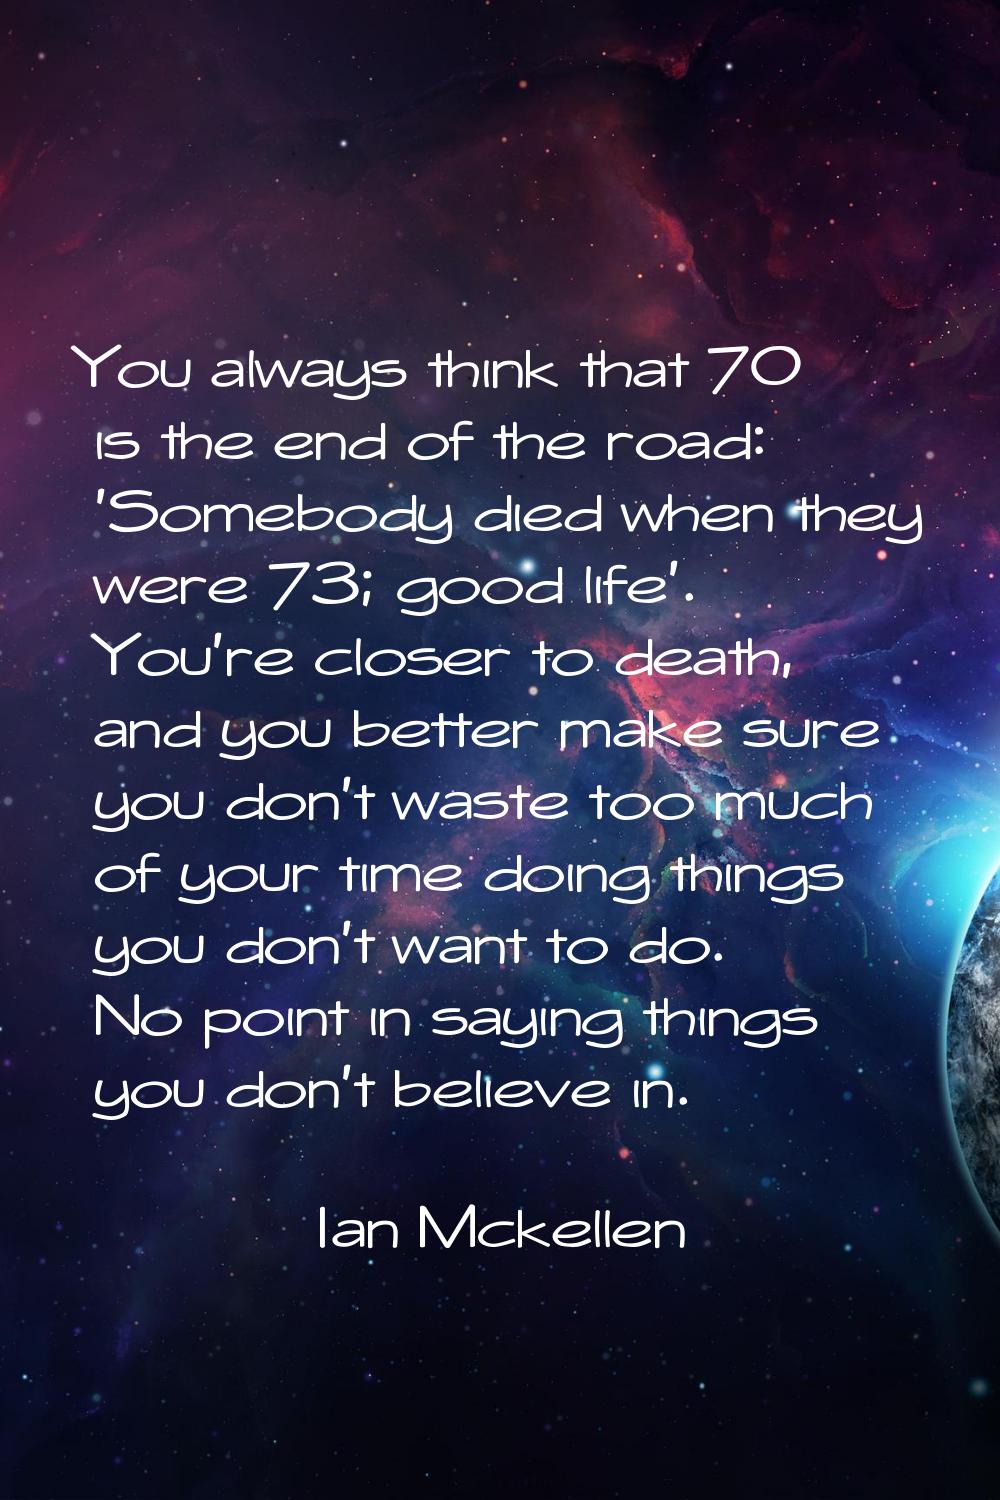 You always think that 70 is the end of the road: 'Somebody died when they were 73; good life'. You'